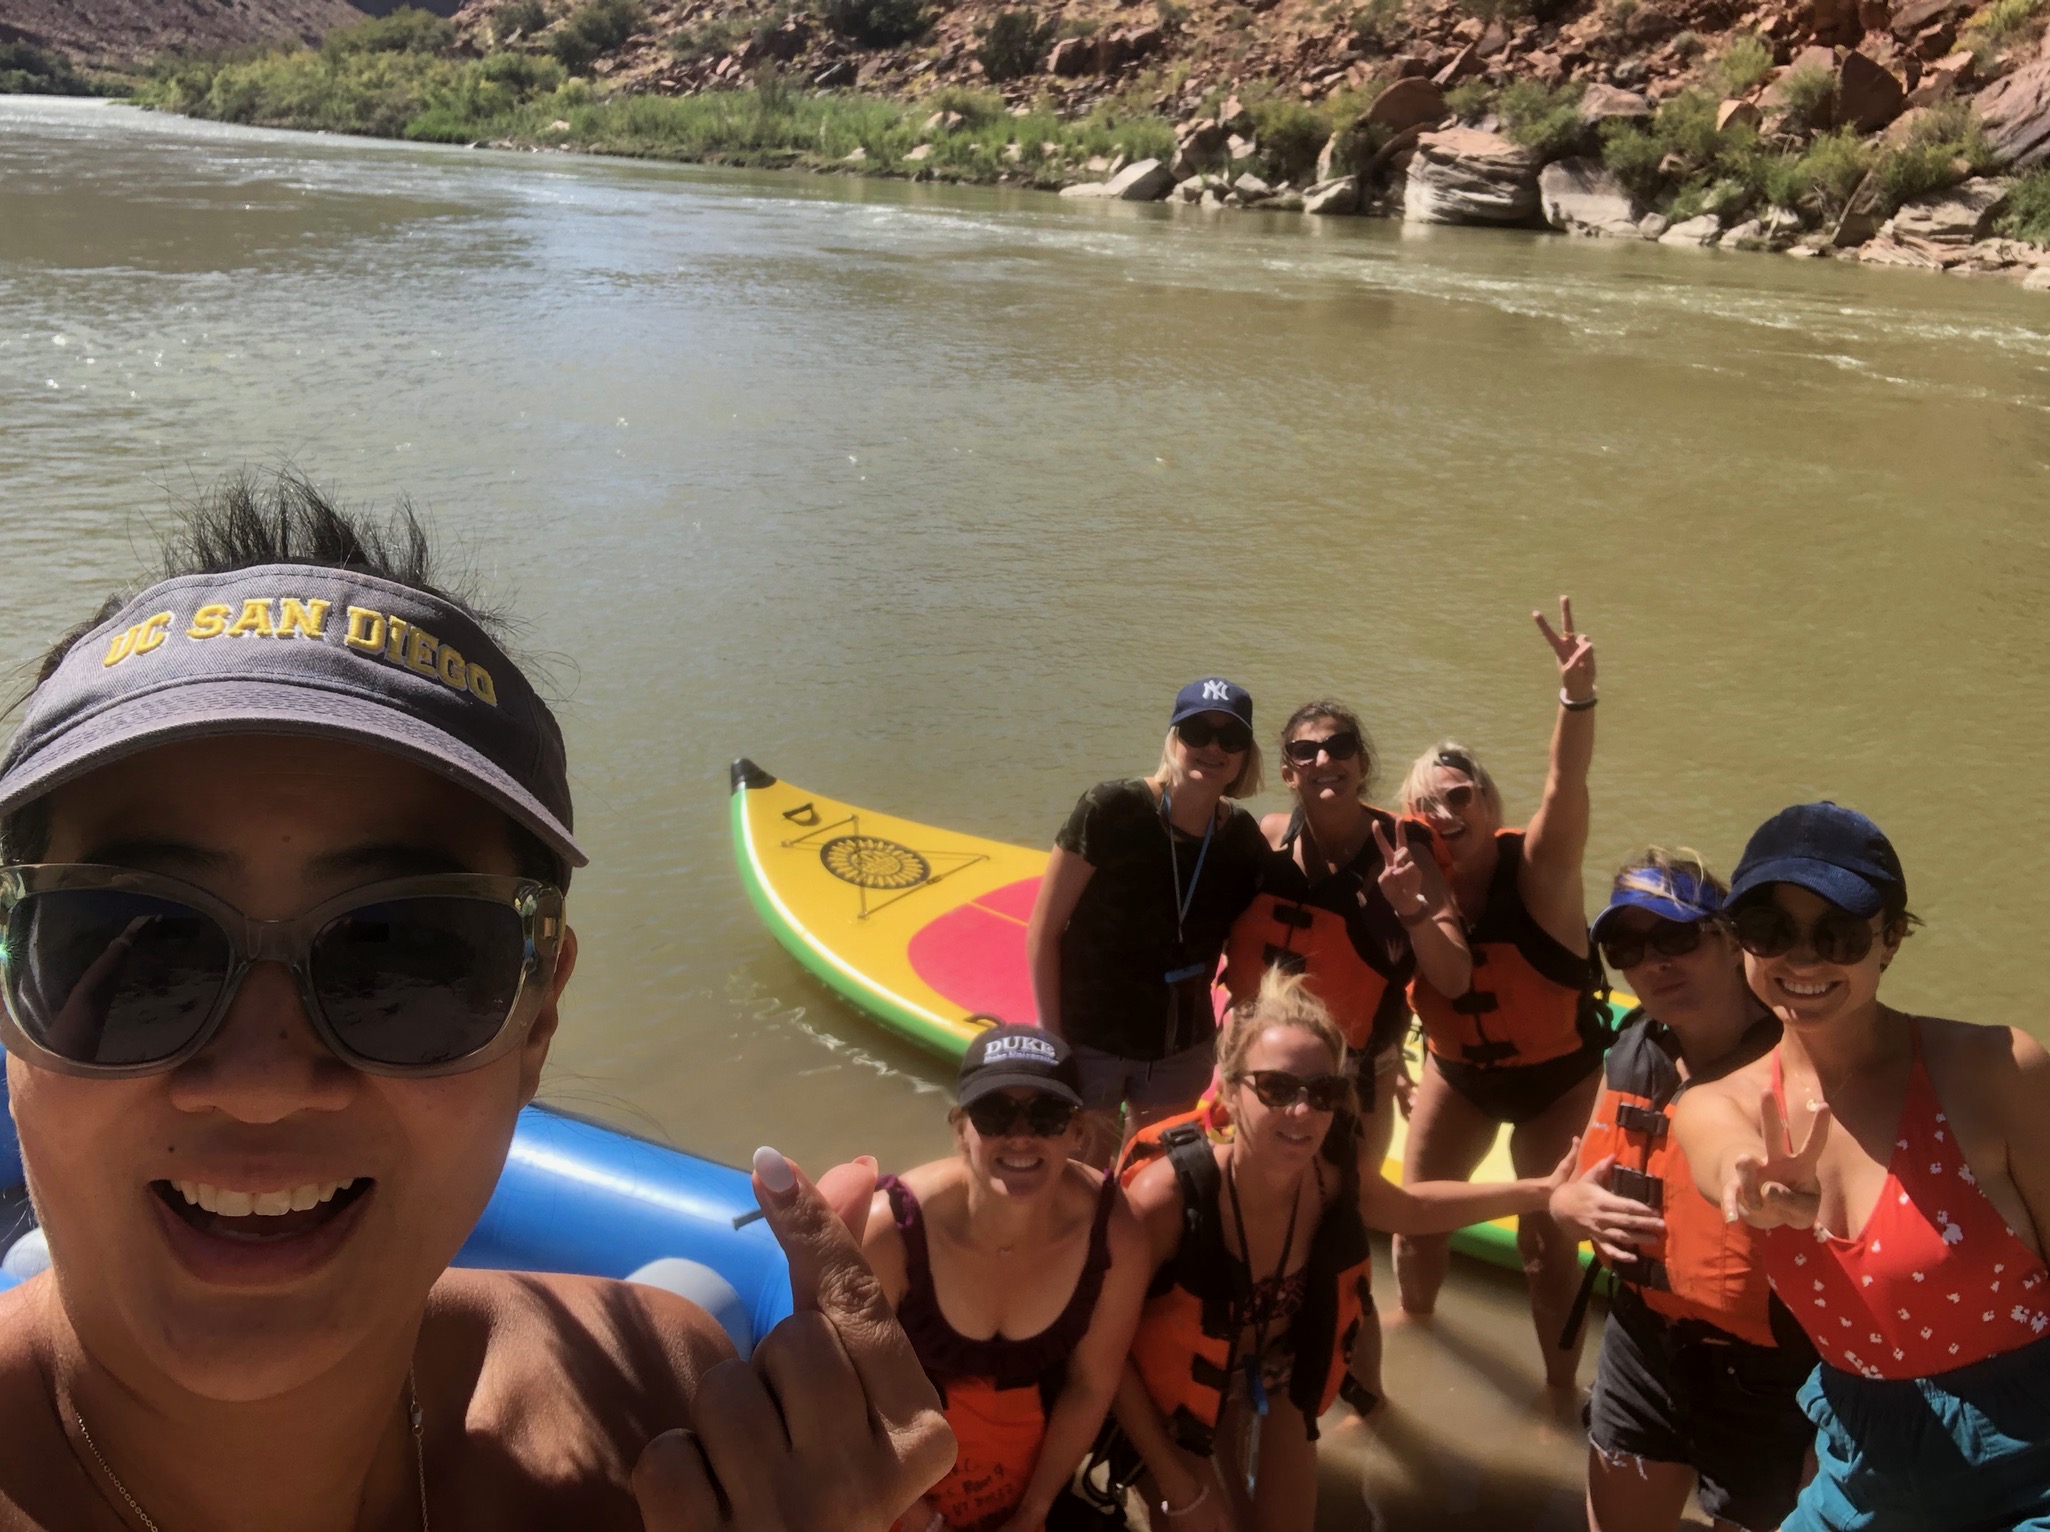 Braving the River WITH this amazing Sisterhood | Moab, Utah | October 2019